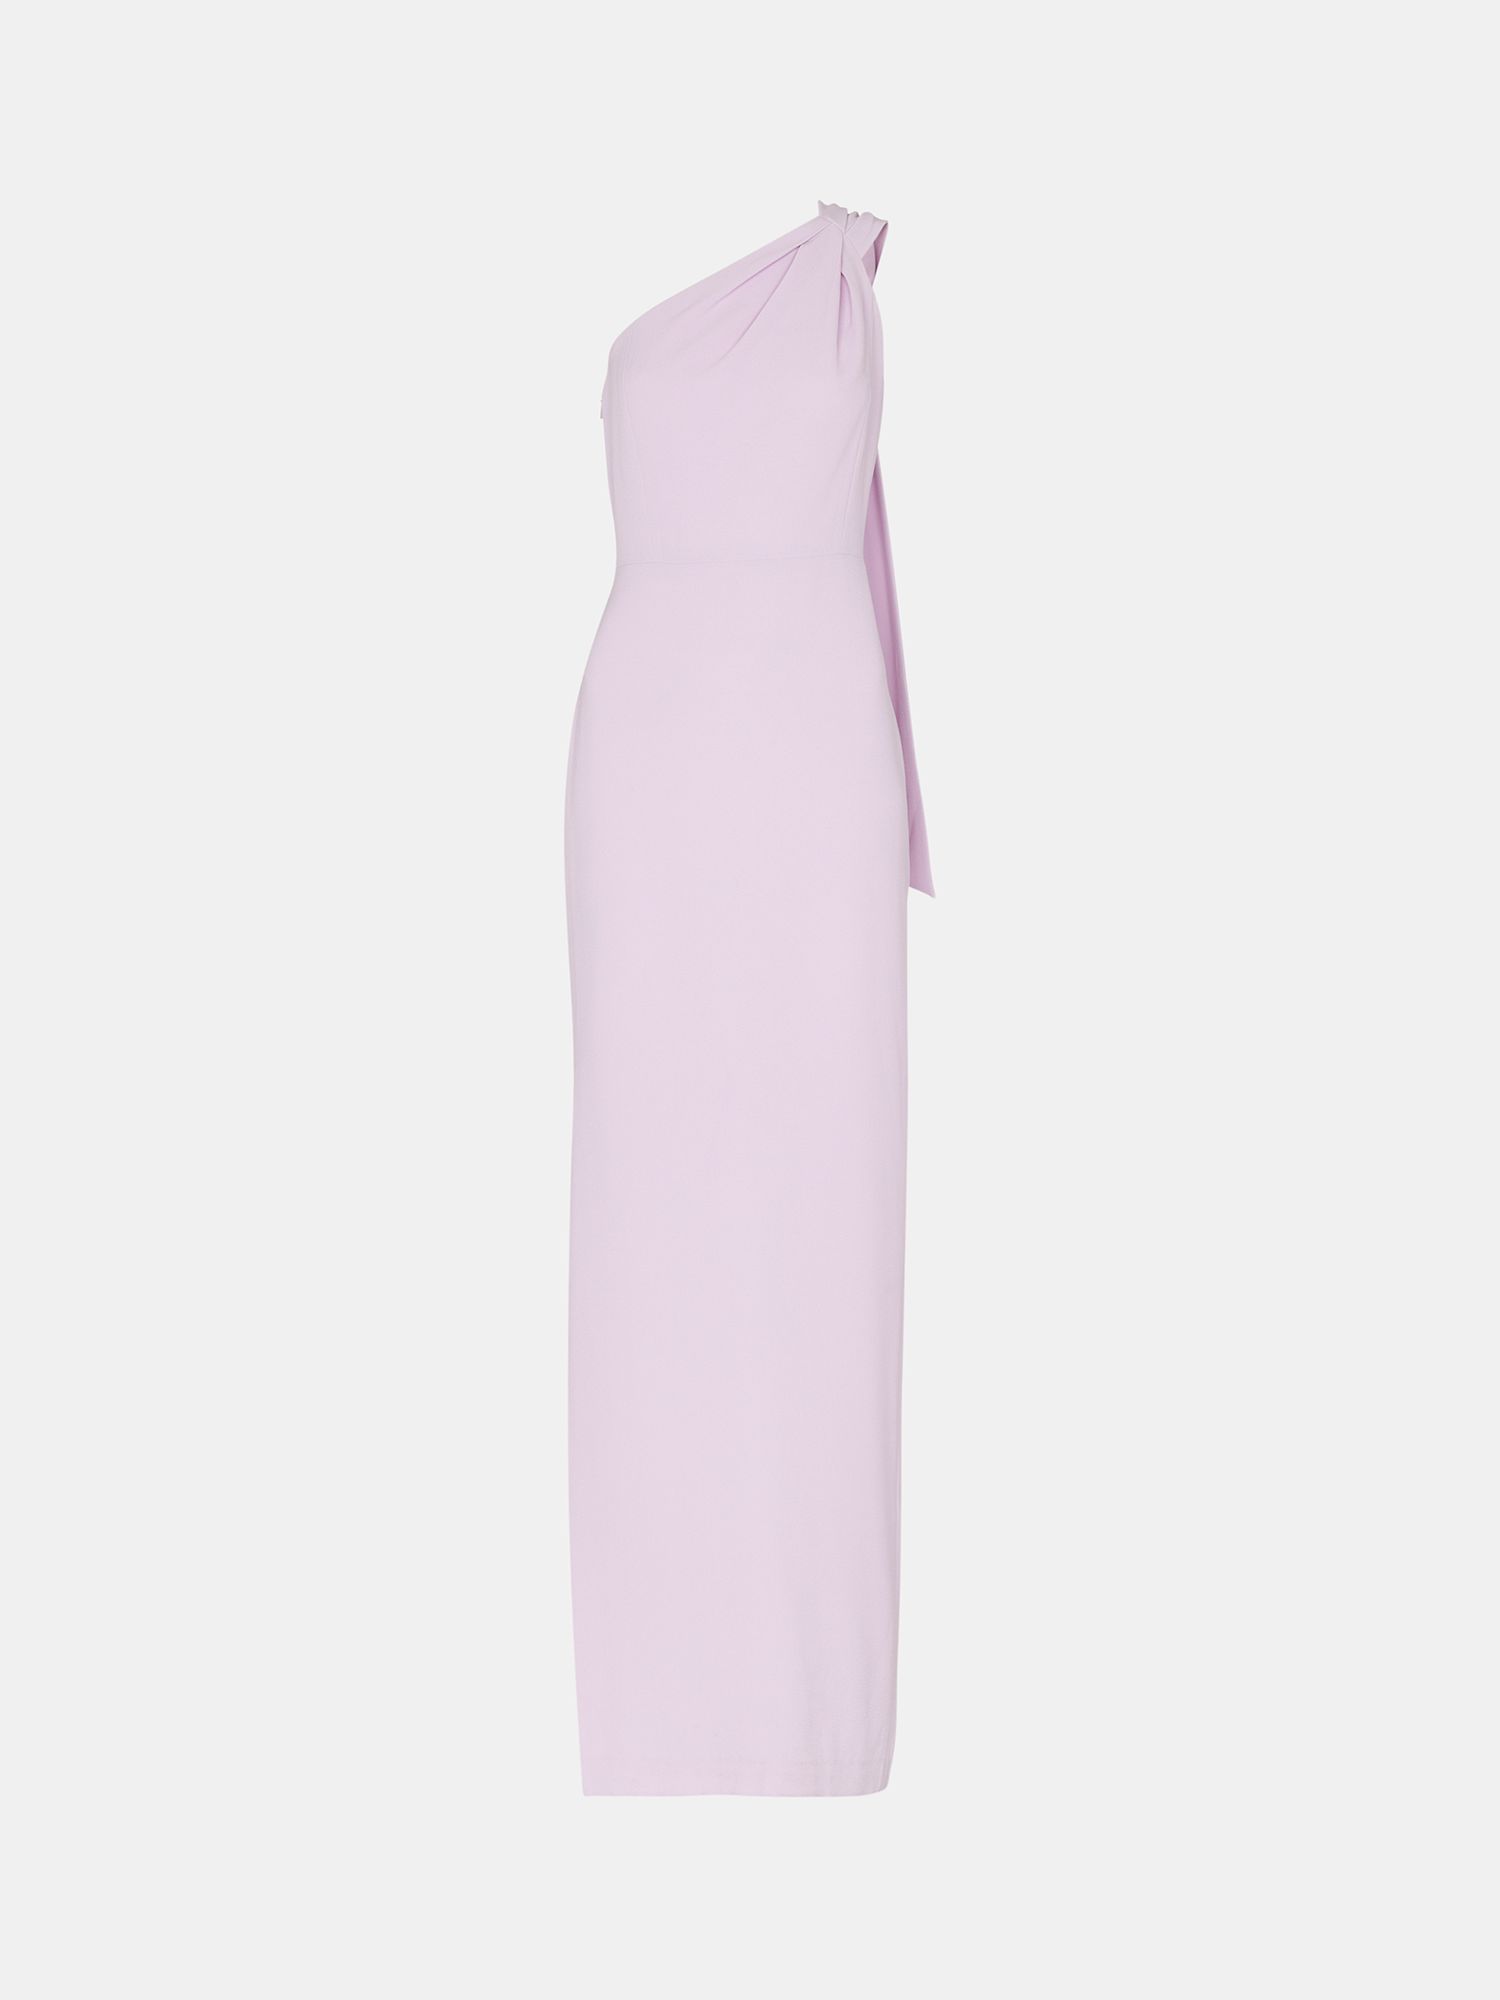 Whistles Bethan One Shoulder Maxi Dress, Lilac, 6